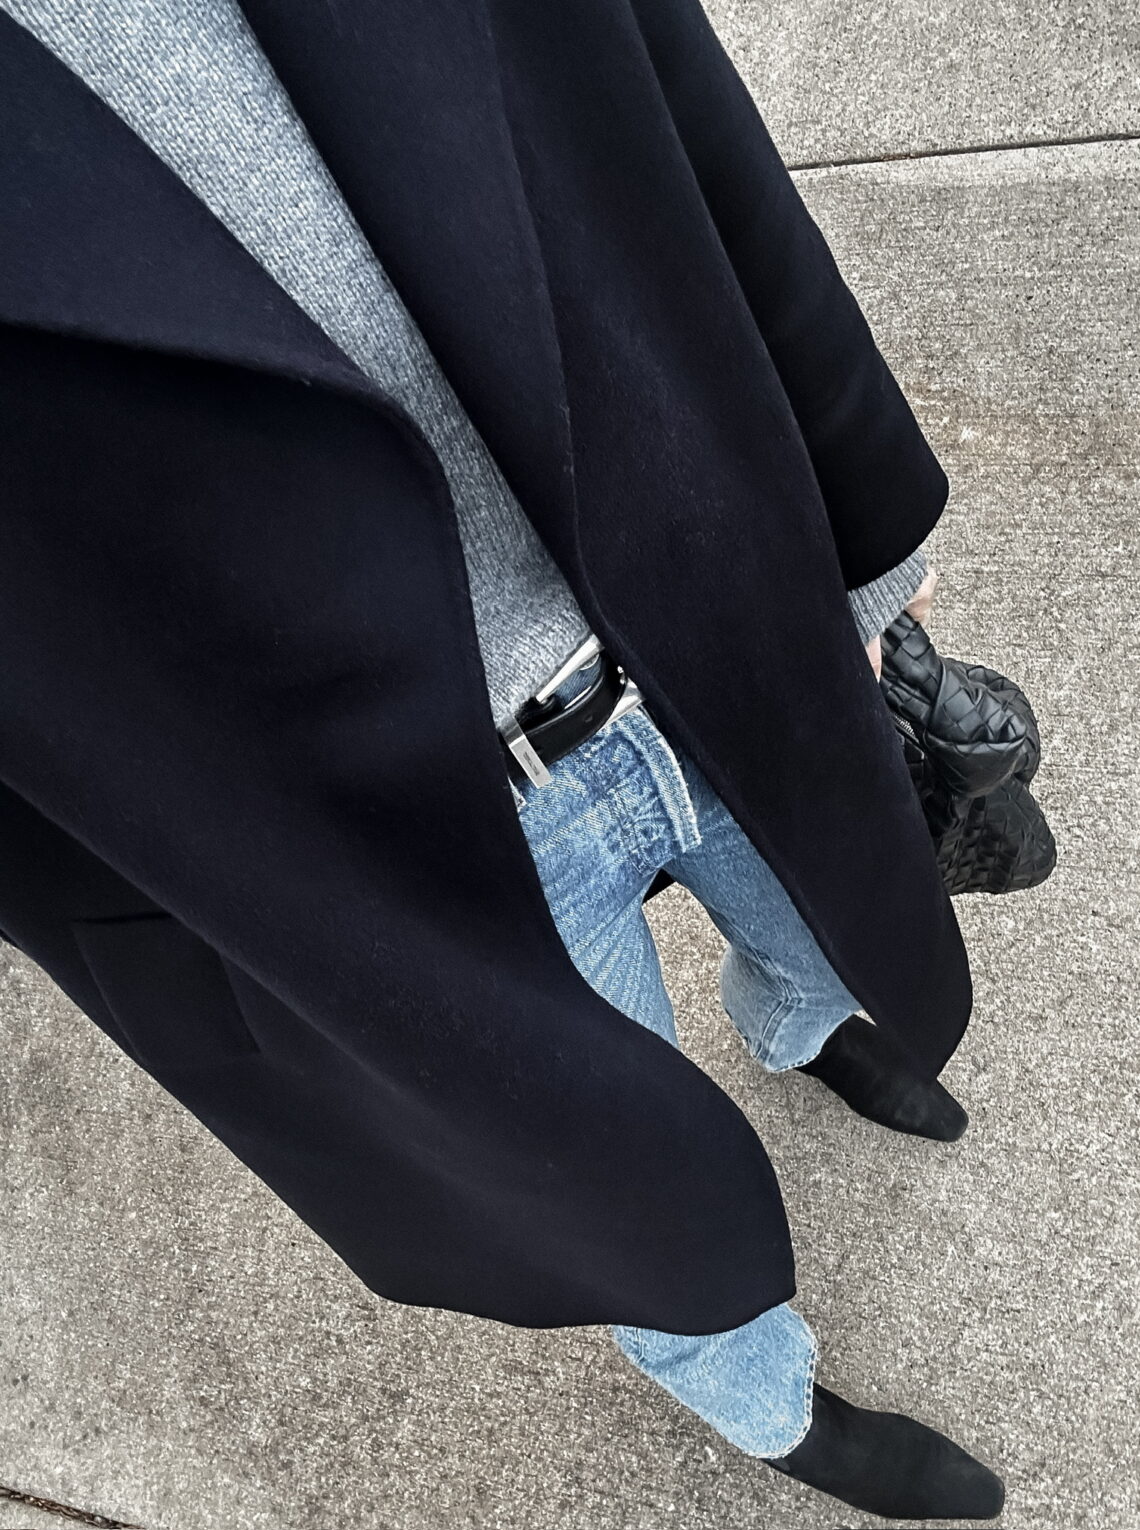 Fashion Jackson wearing MAYSON the label navy wrap coat, MAYSON the label grey sweater, AGOLDE jeans, suede boots, winter outfit